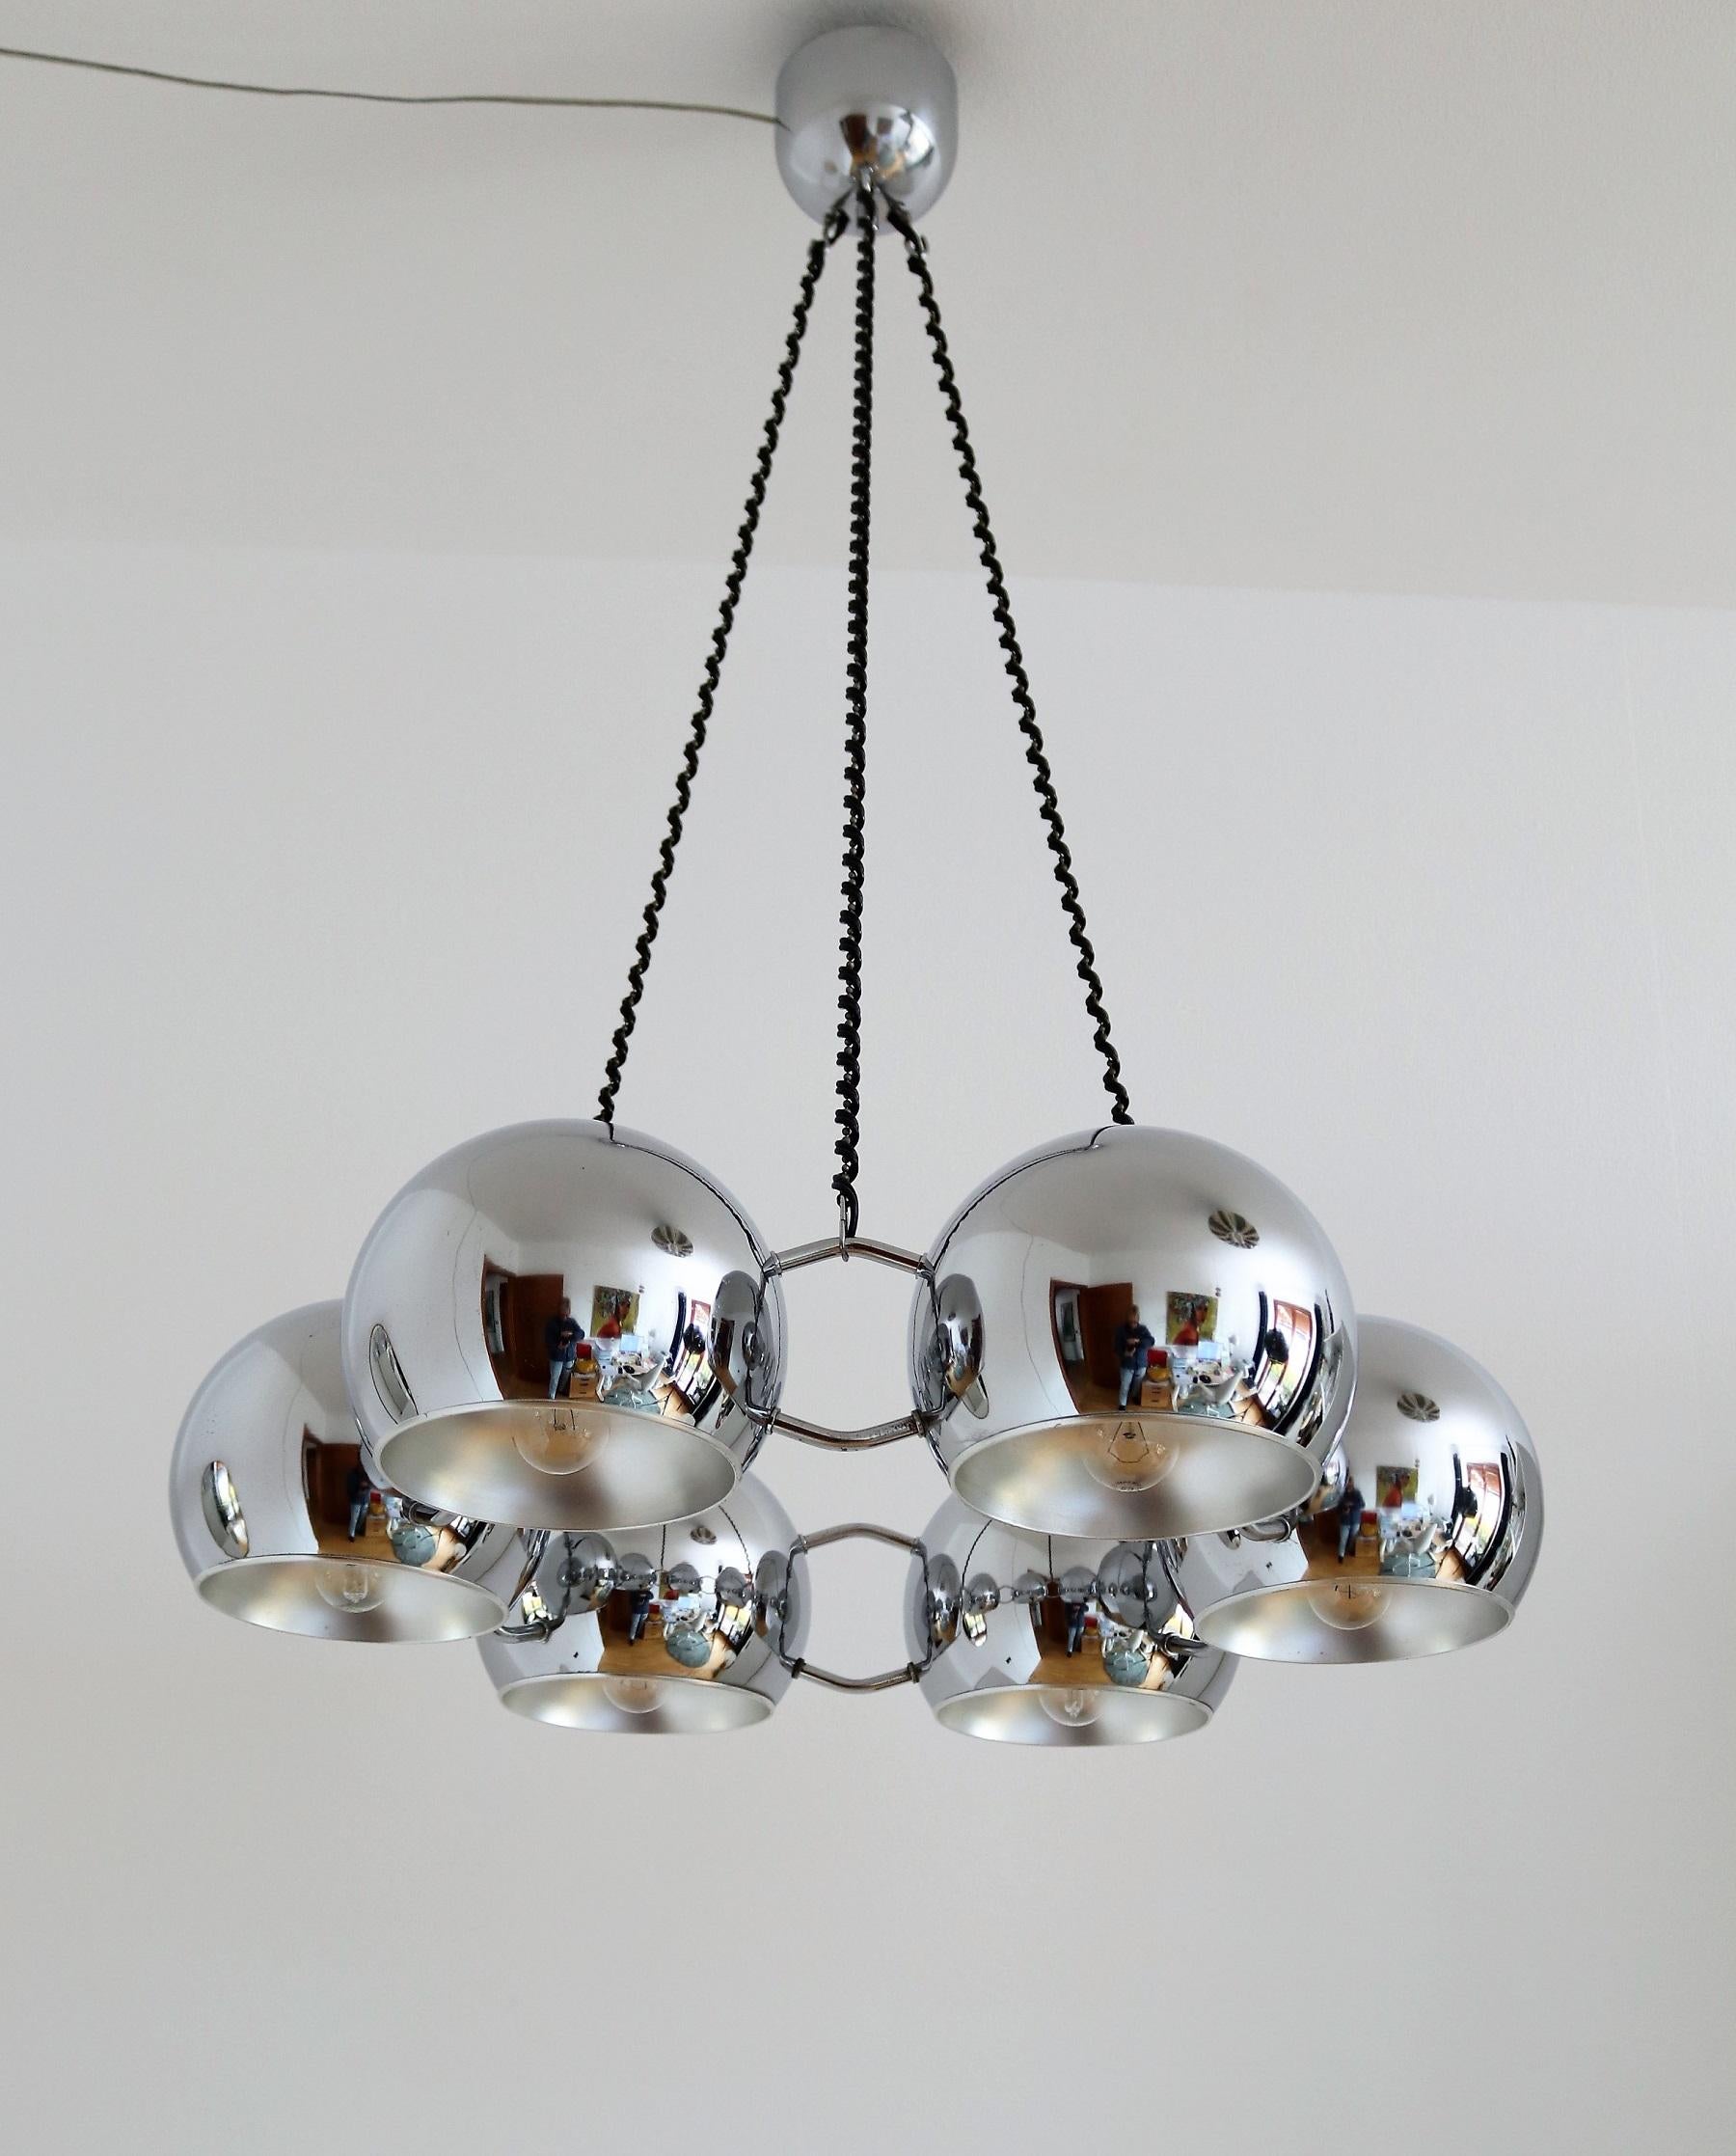 Late 20th Century Italian Space Age Chromed Chandelier with Six Lights by Reggiani, 1970s